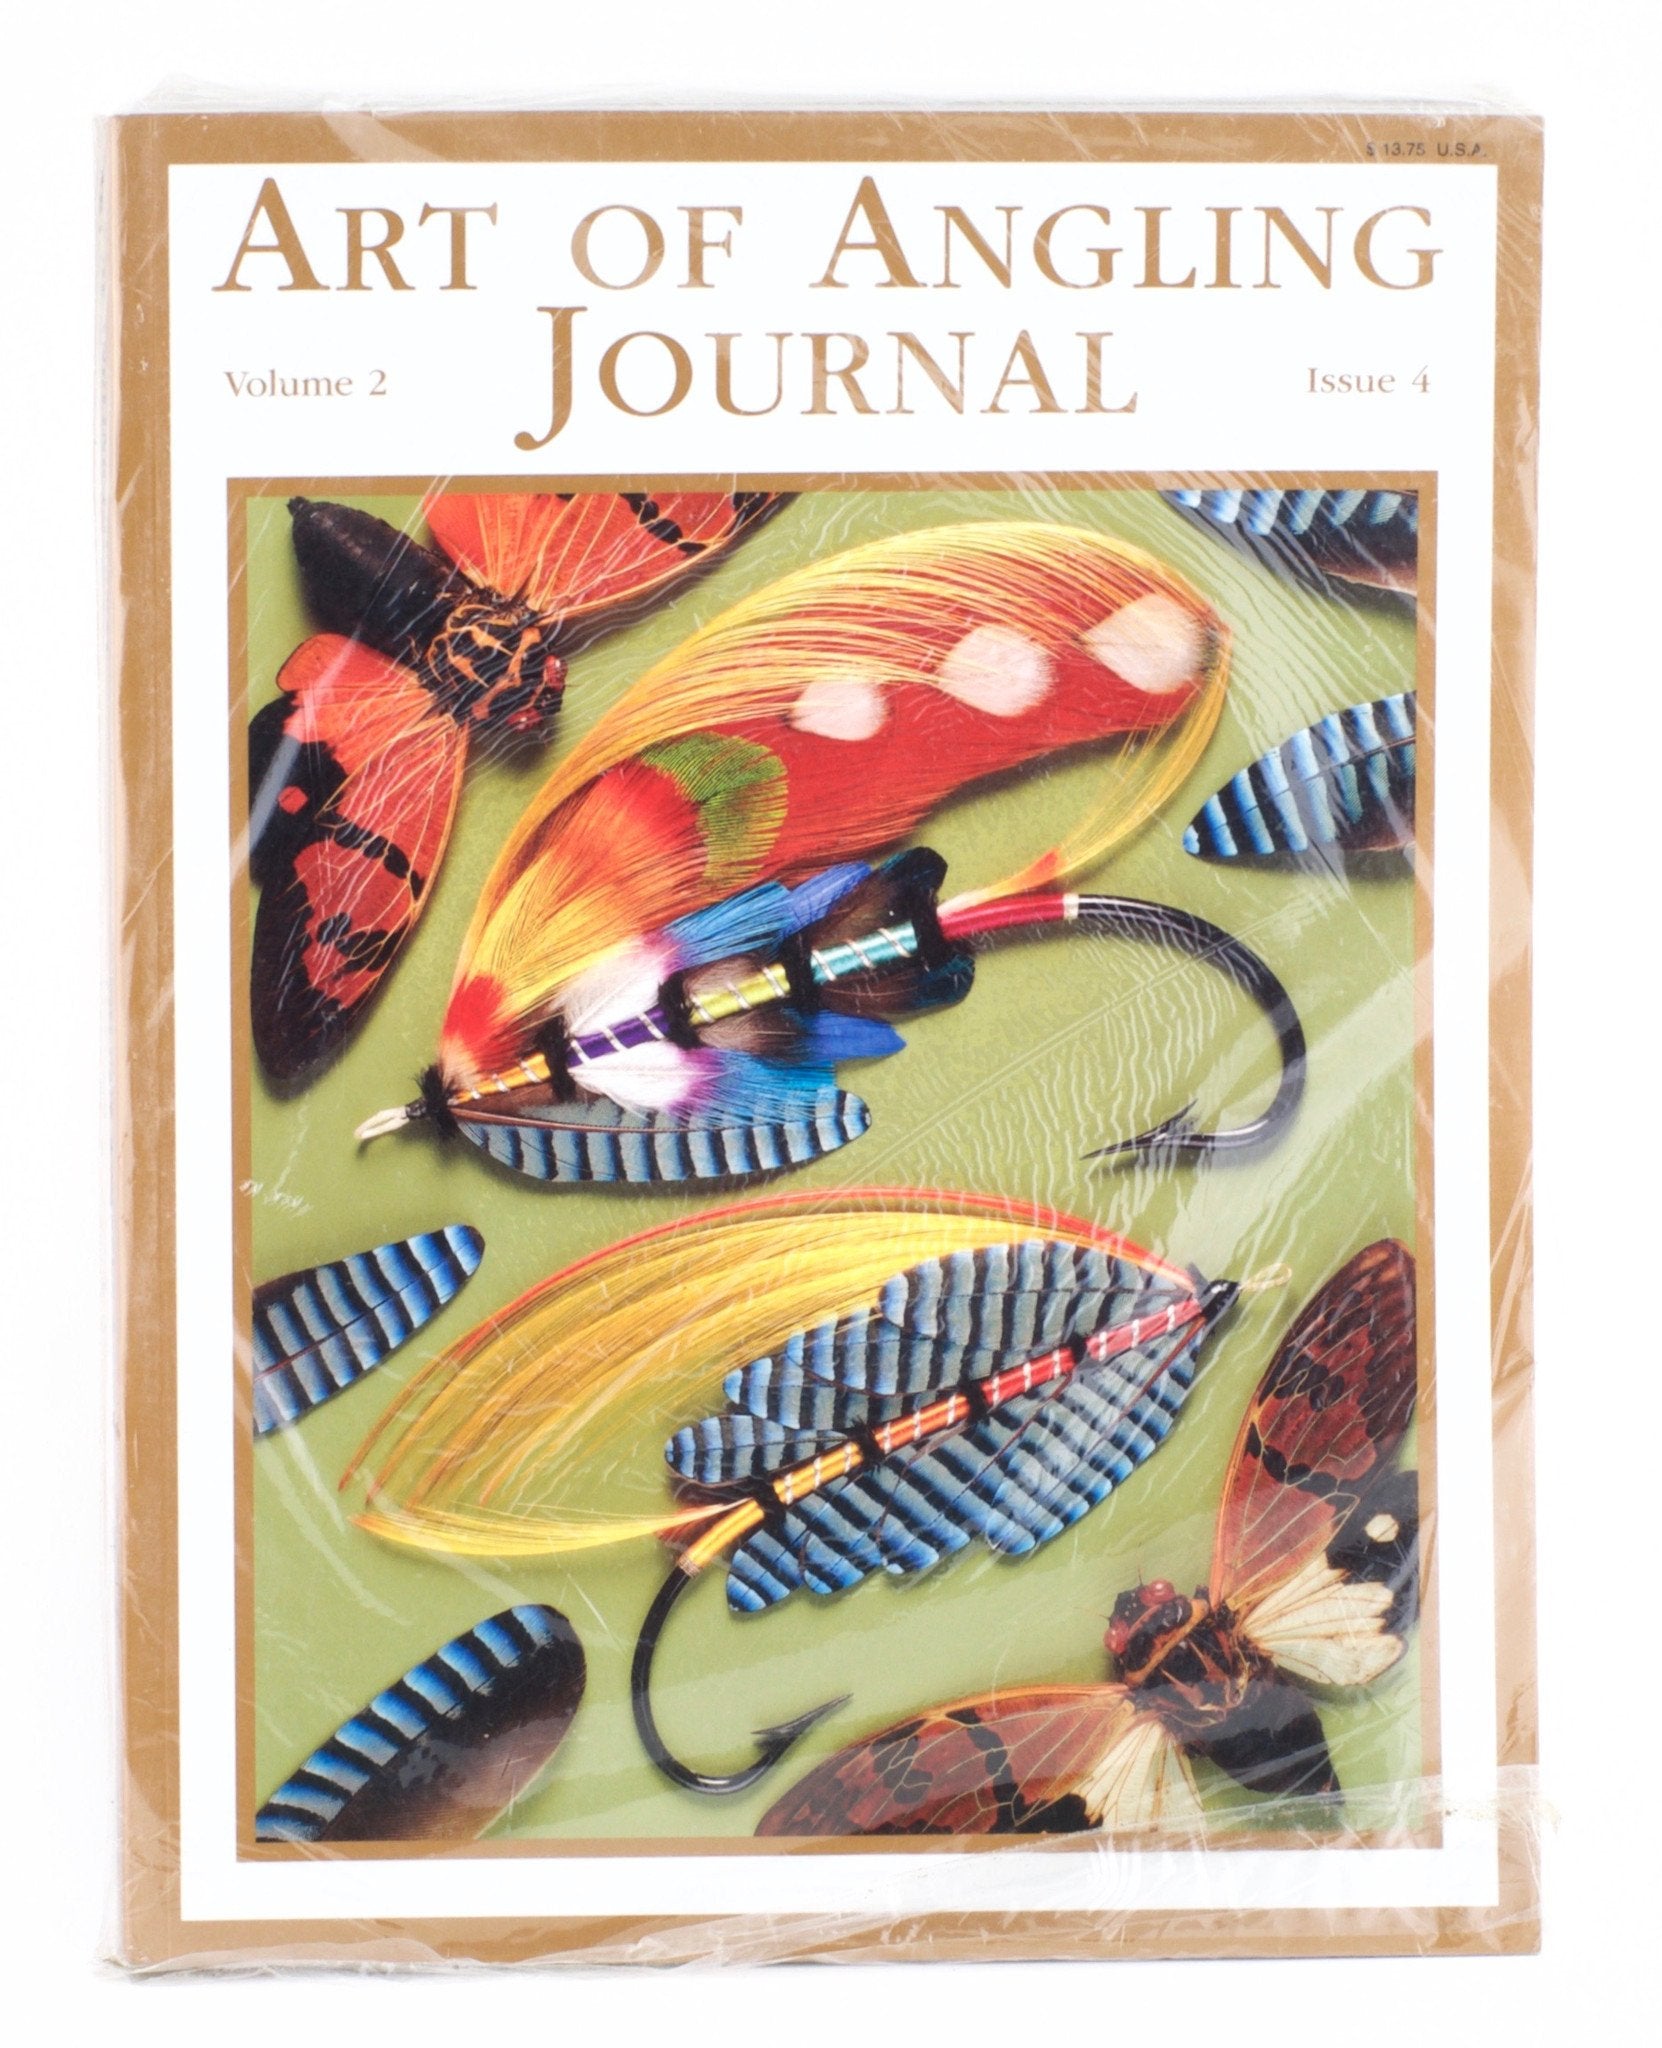 Art of Angling Journal - Volume 2 Issue 4 